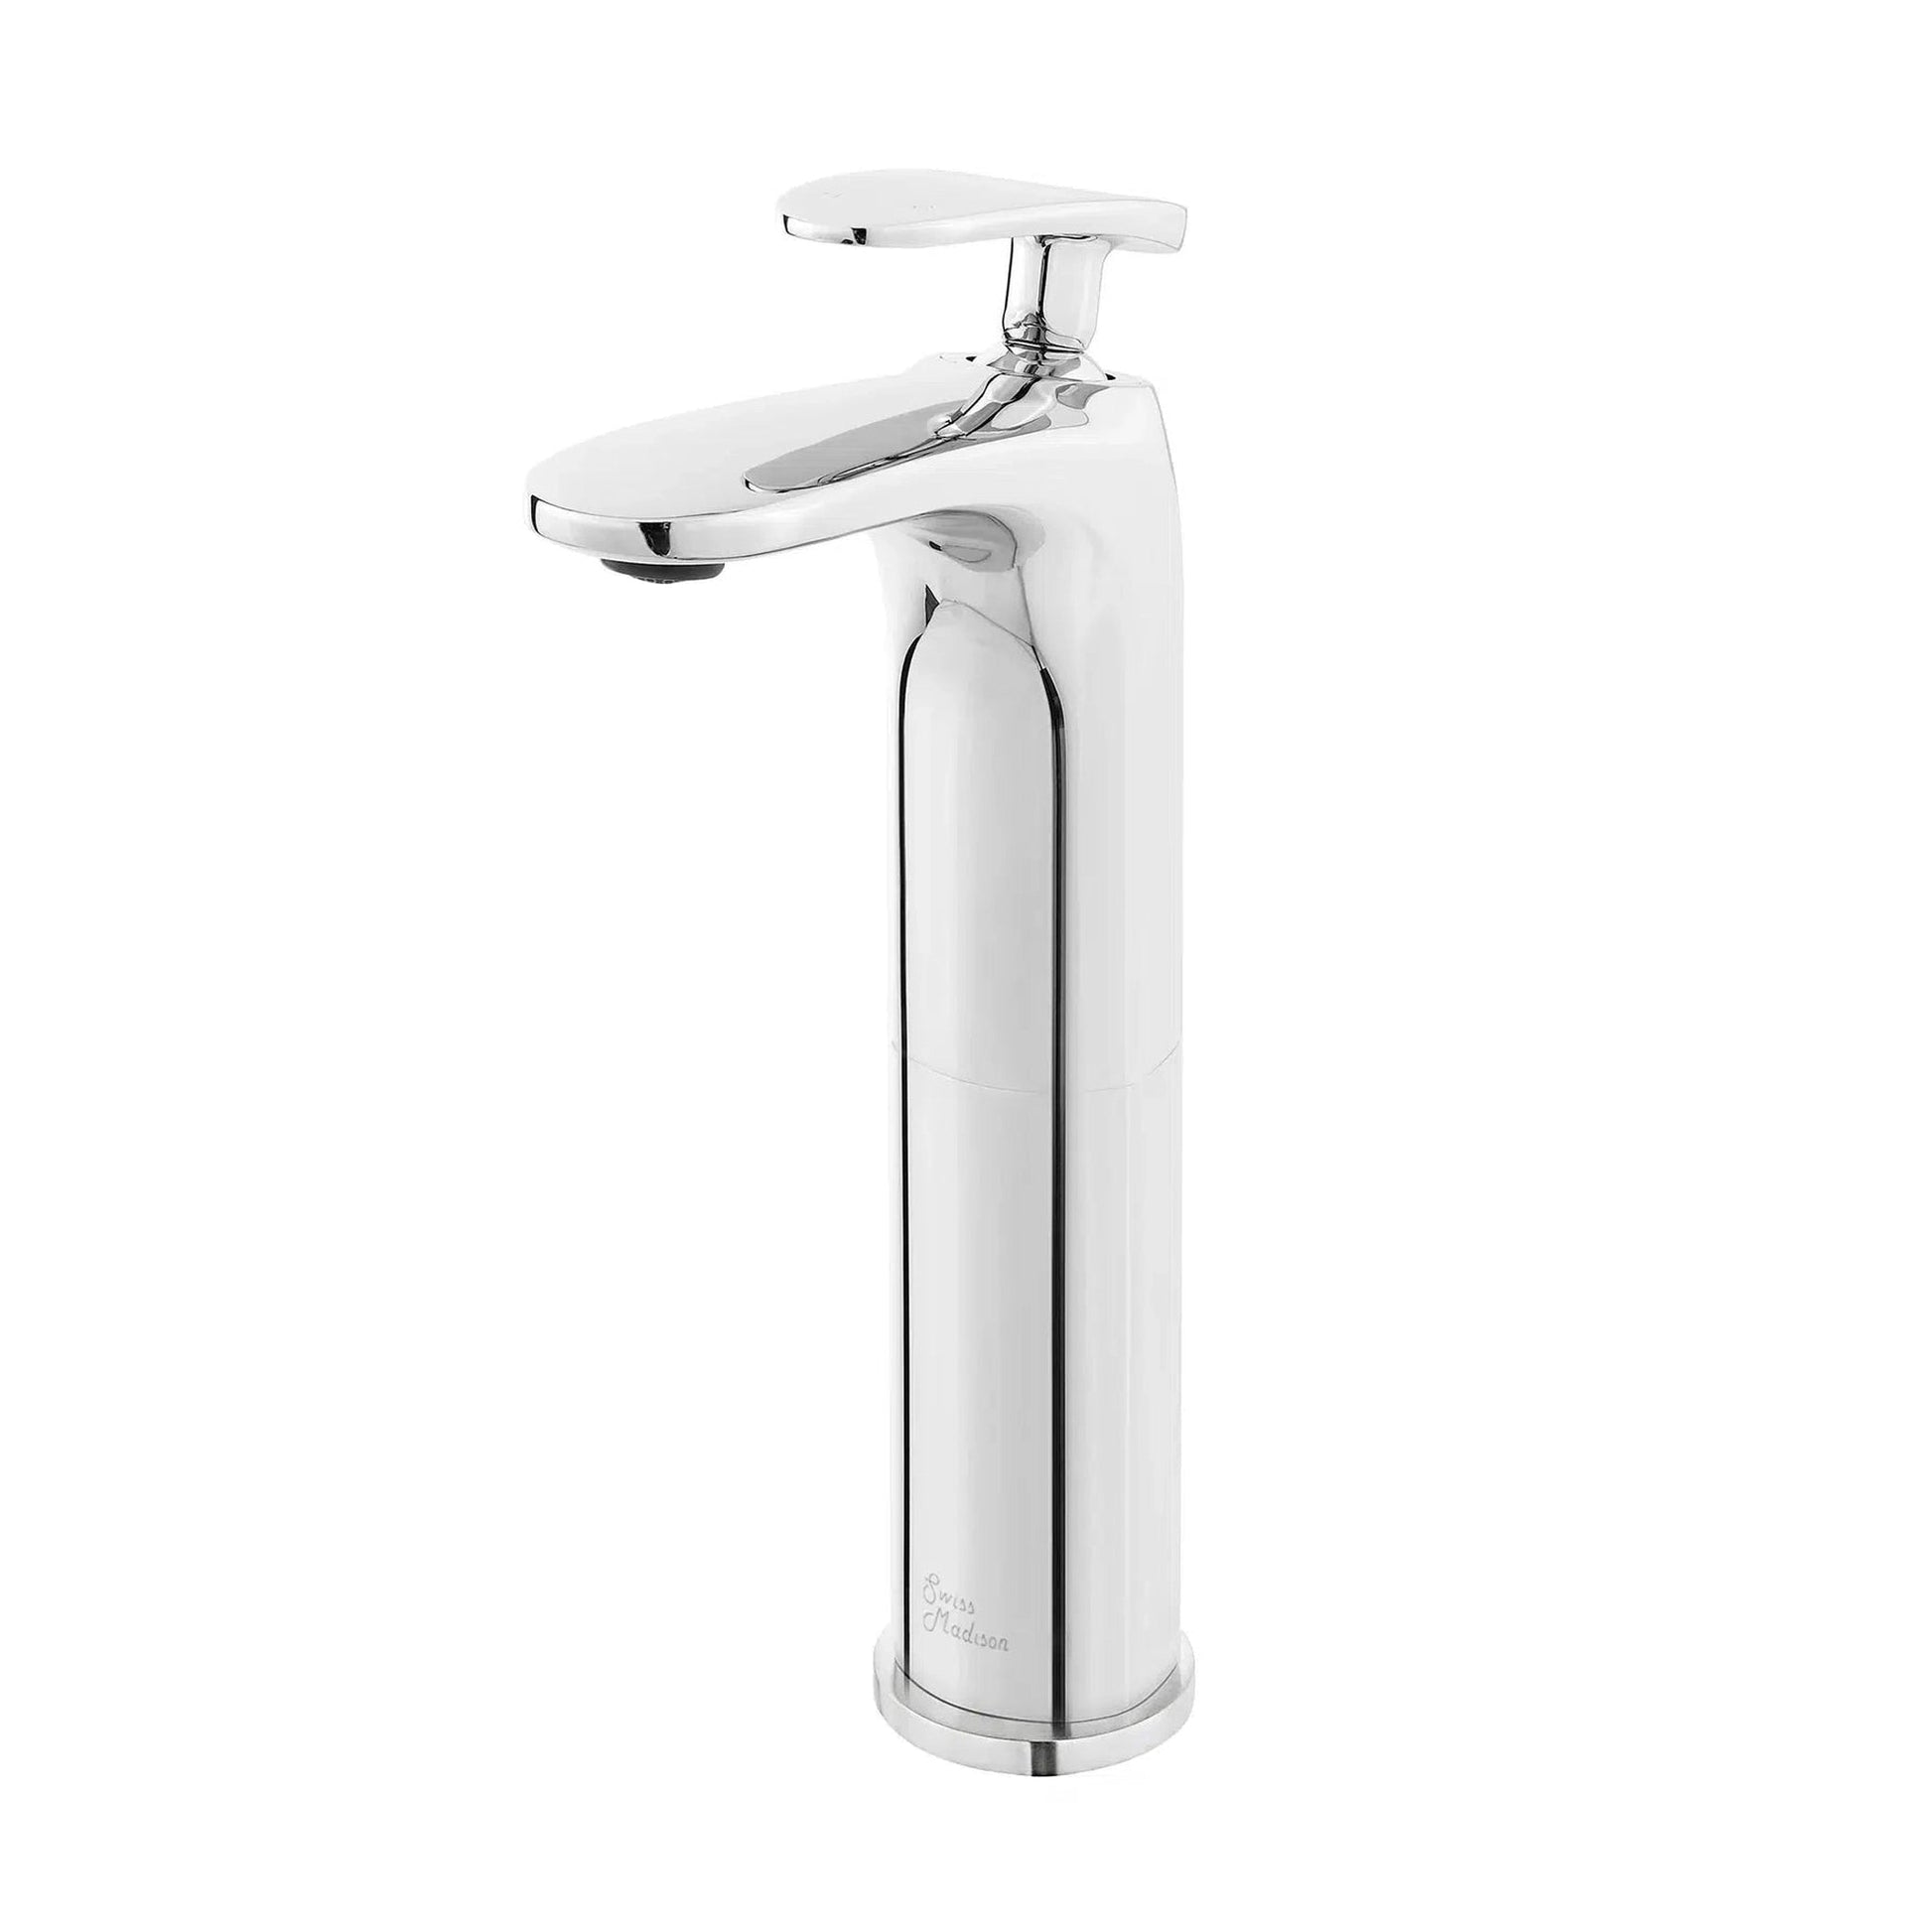 Swiss Madison Sublime 11" Chrome Single Hole Bathroom Faucet With Flow Rate of 1.2 GPM